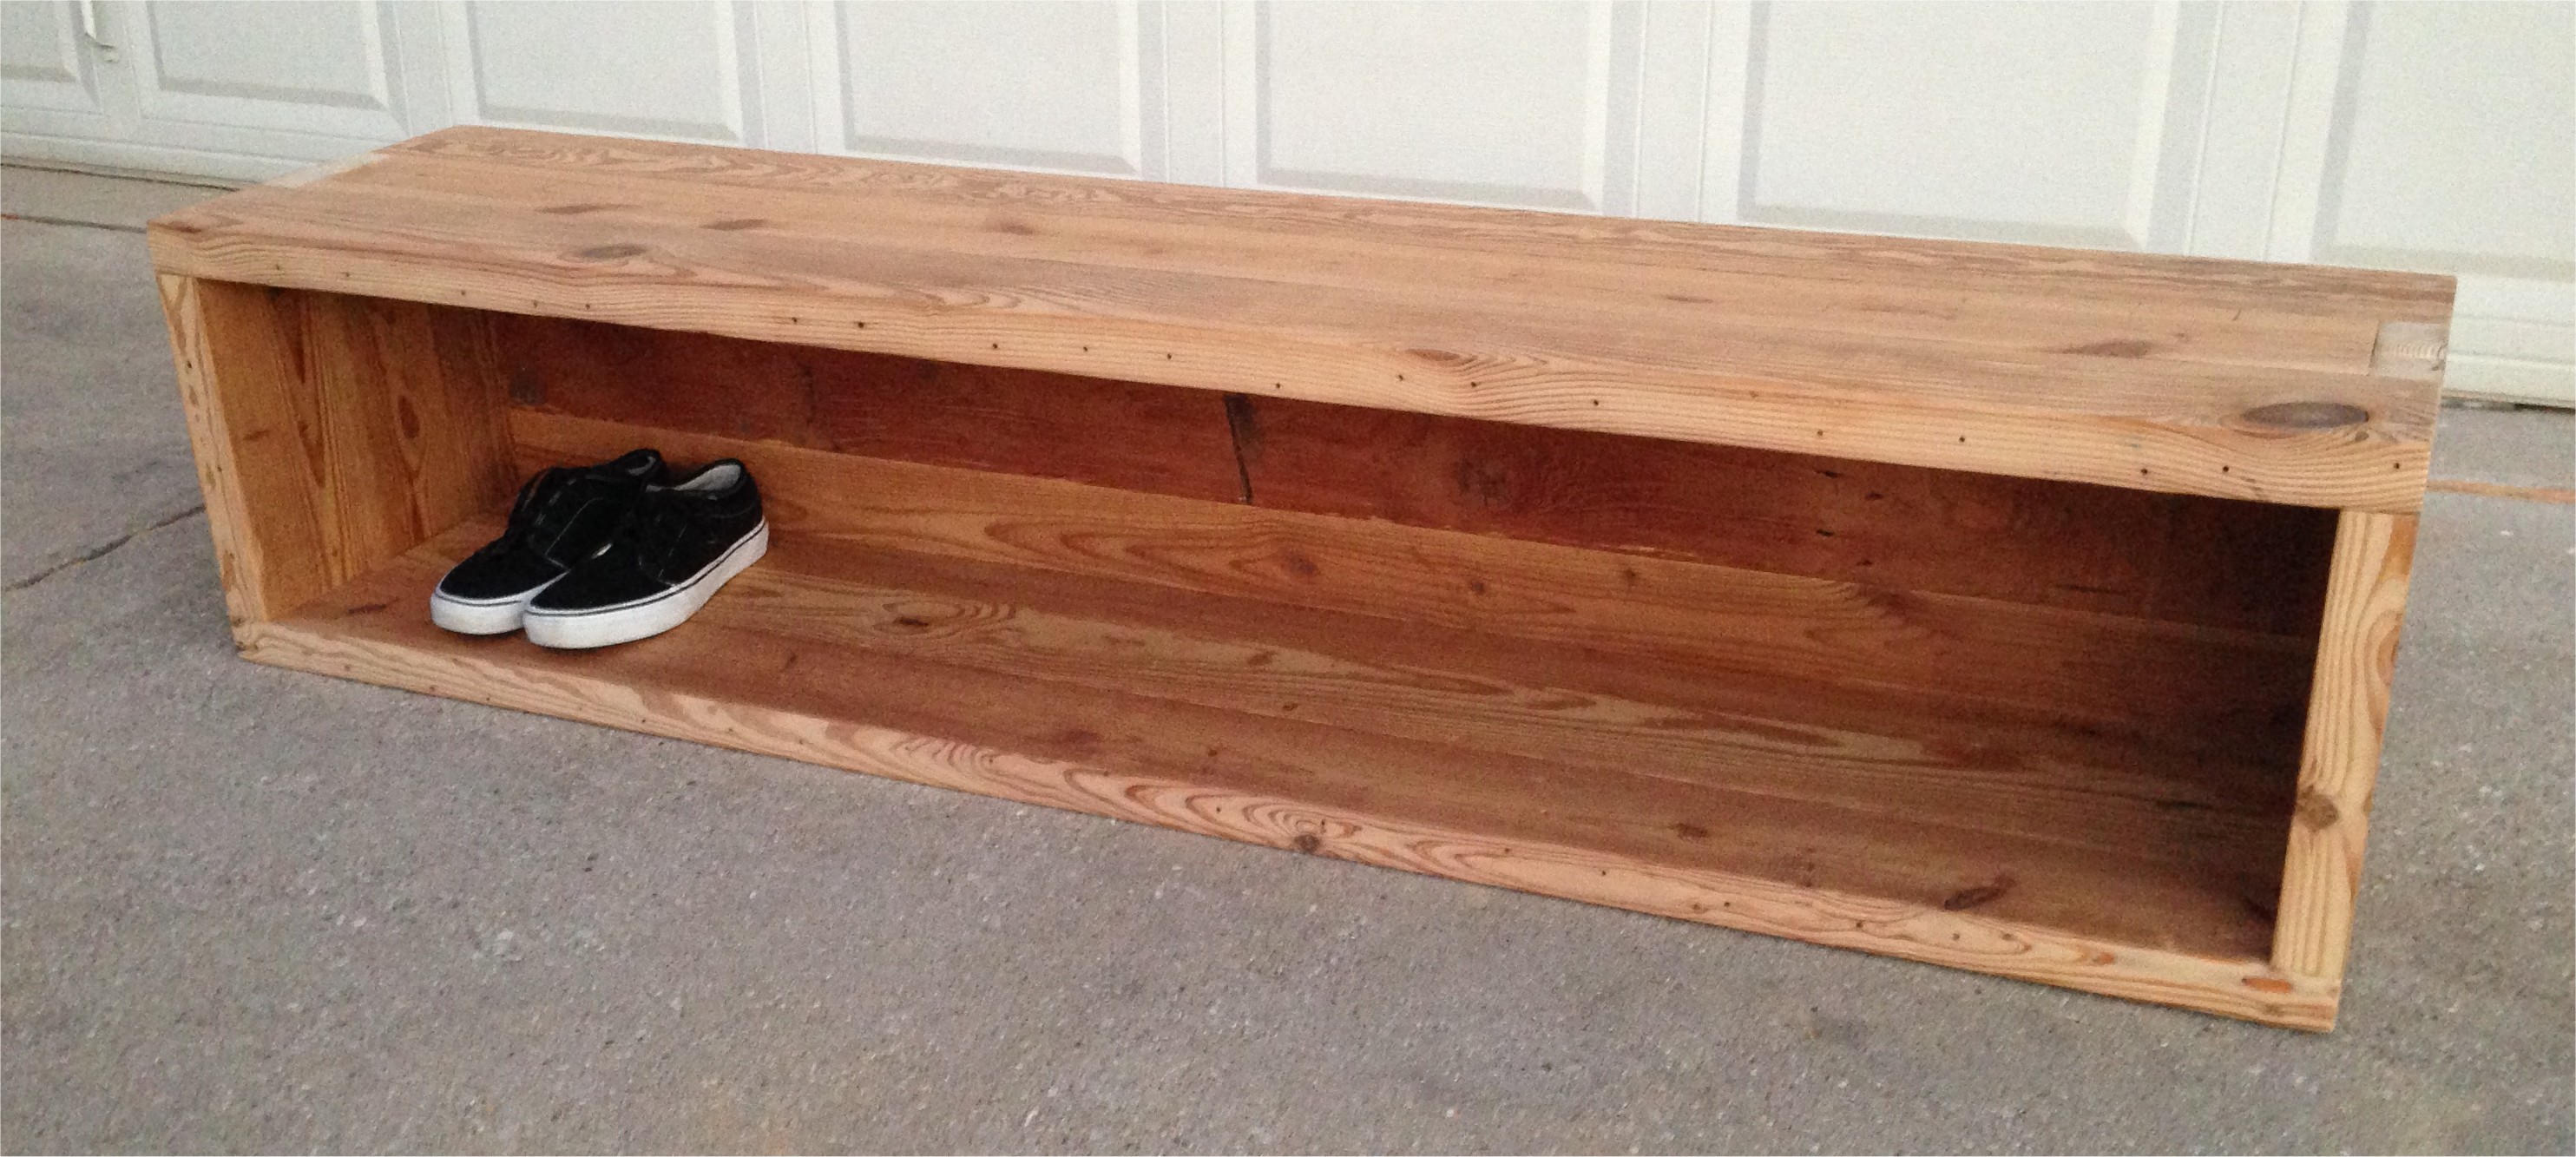 Reclaimed Storage Bench | the grain.